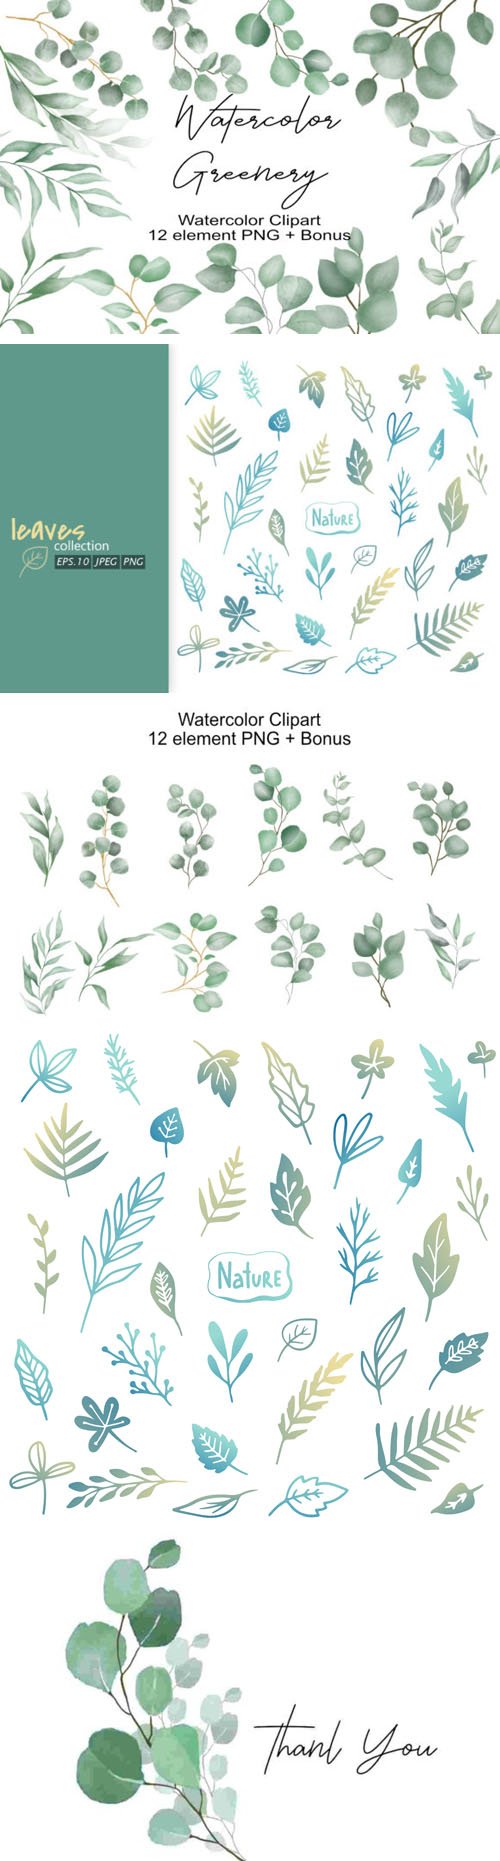 Watercolor Greenery Leaves - Clipart Collection